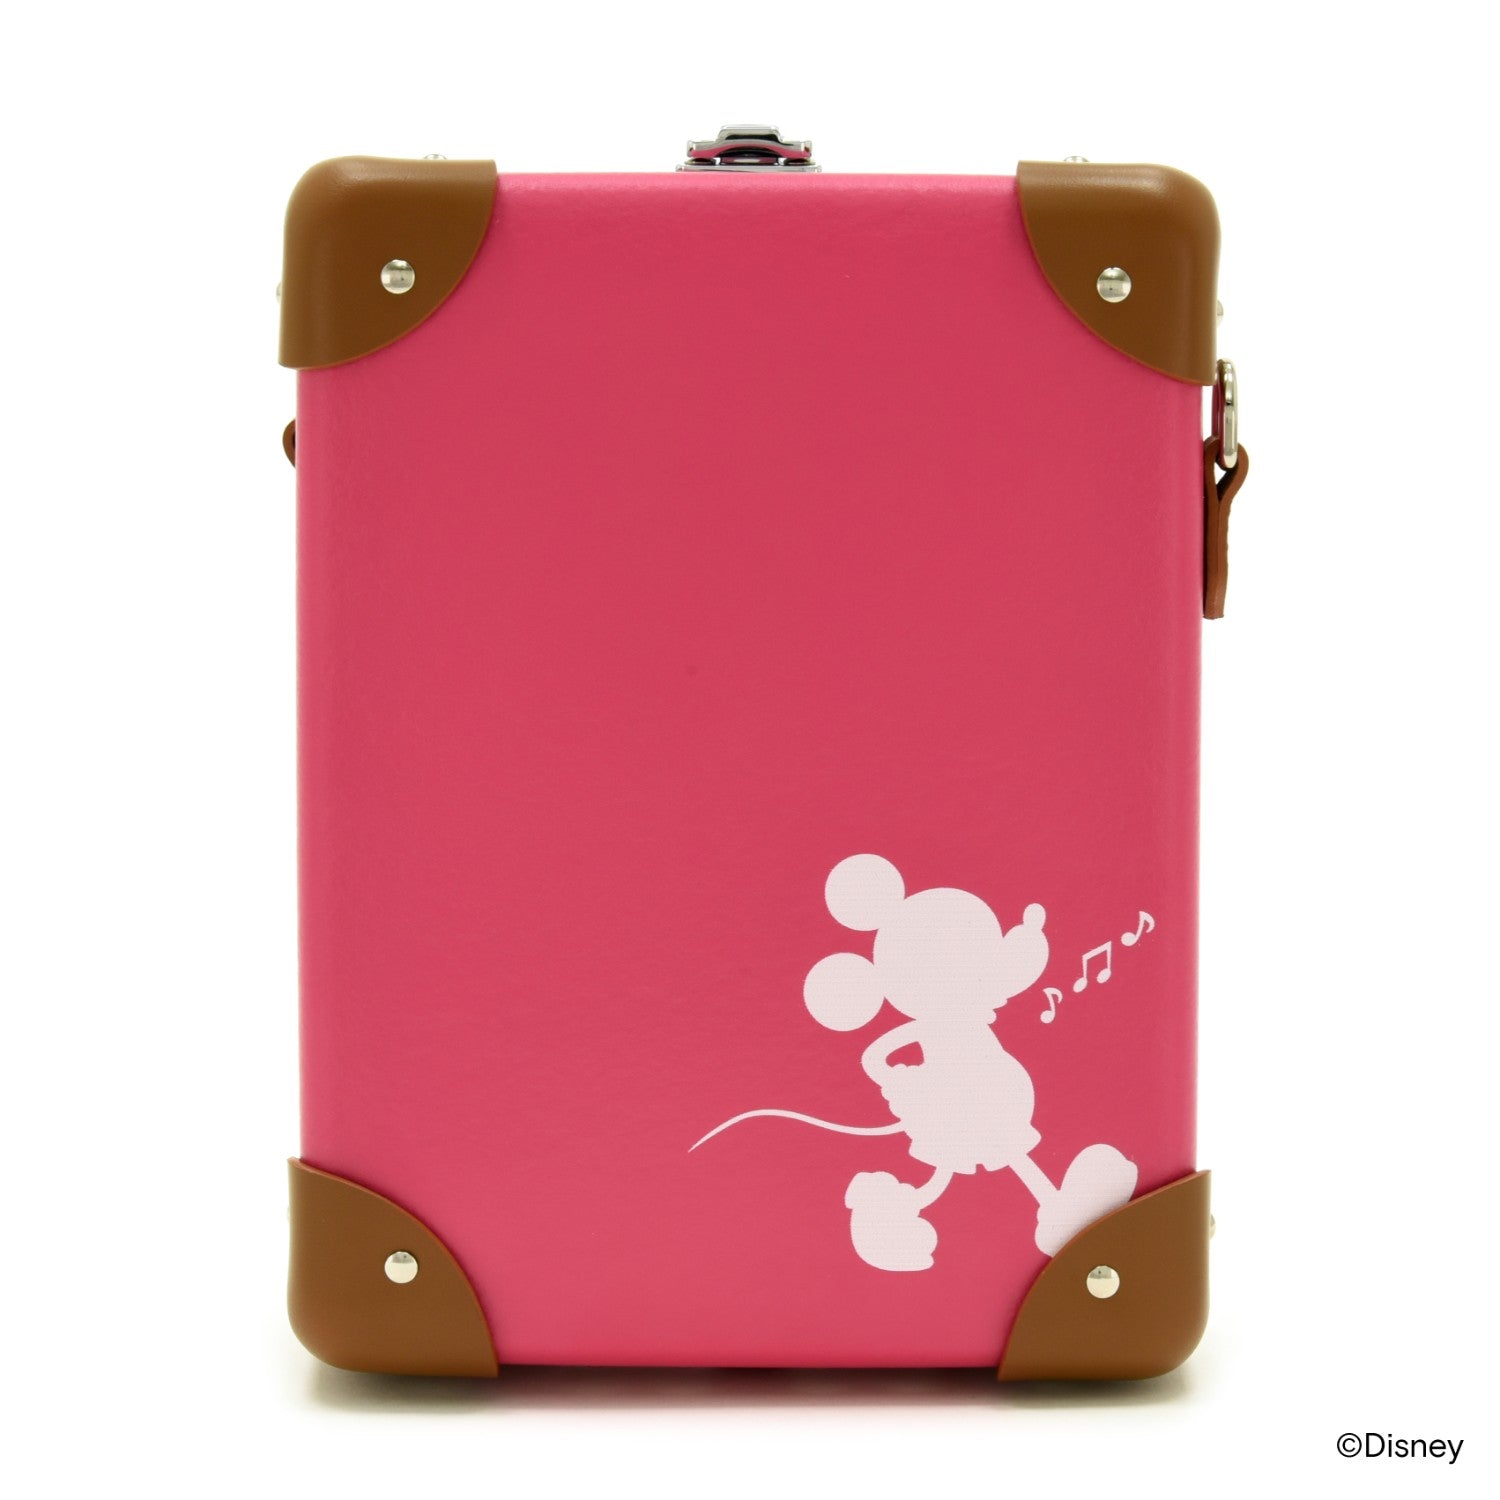 Taiwan Disney Collaboration - Disney Characters Leather Shoulder